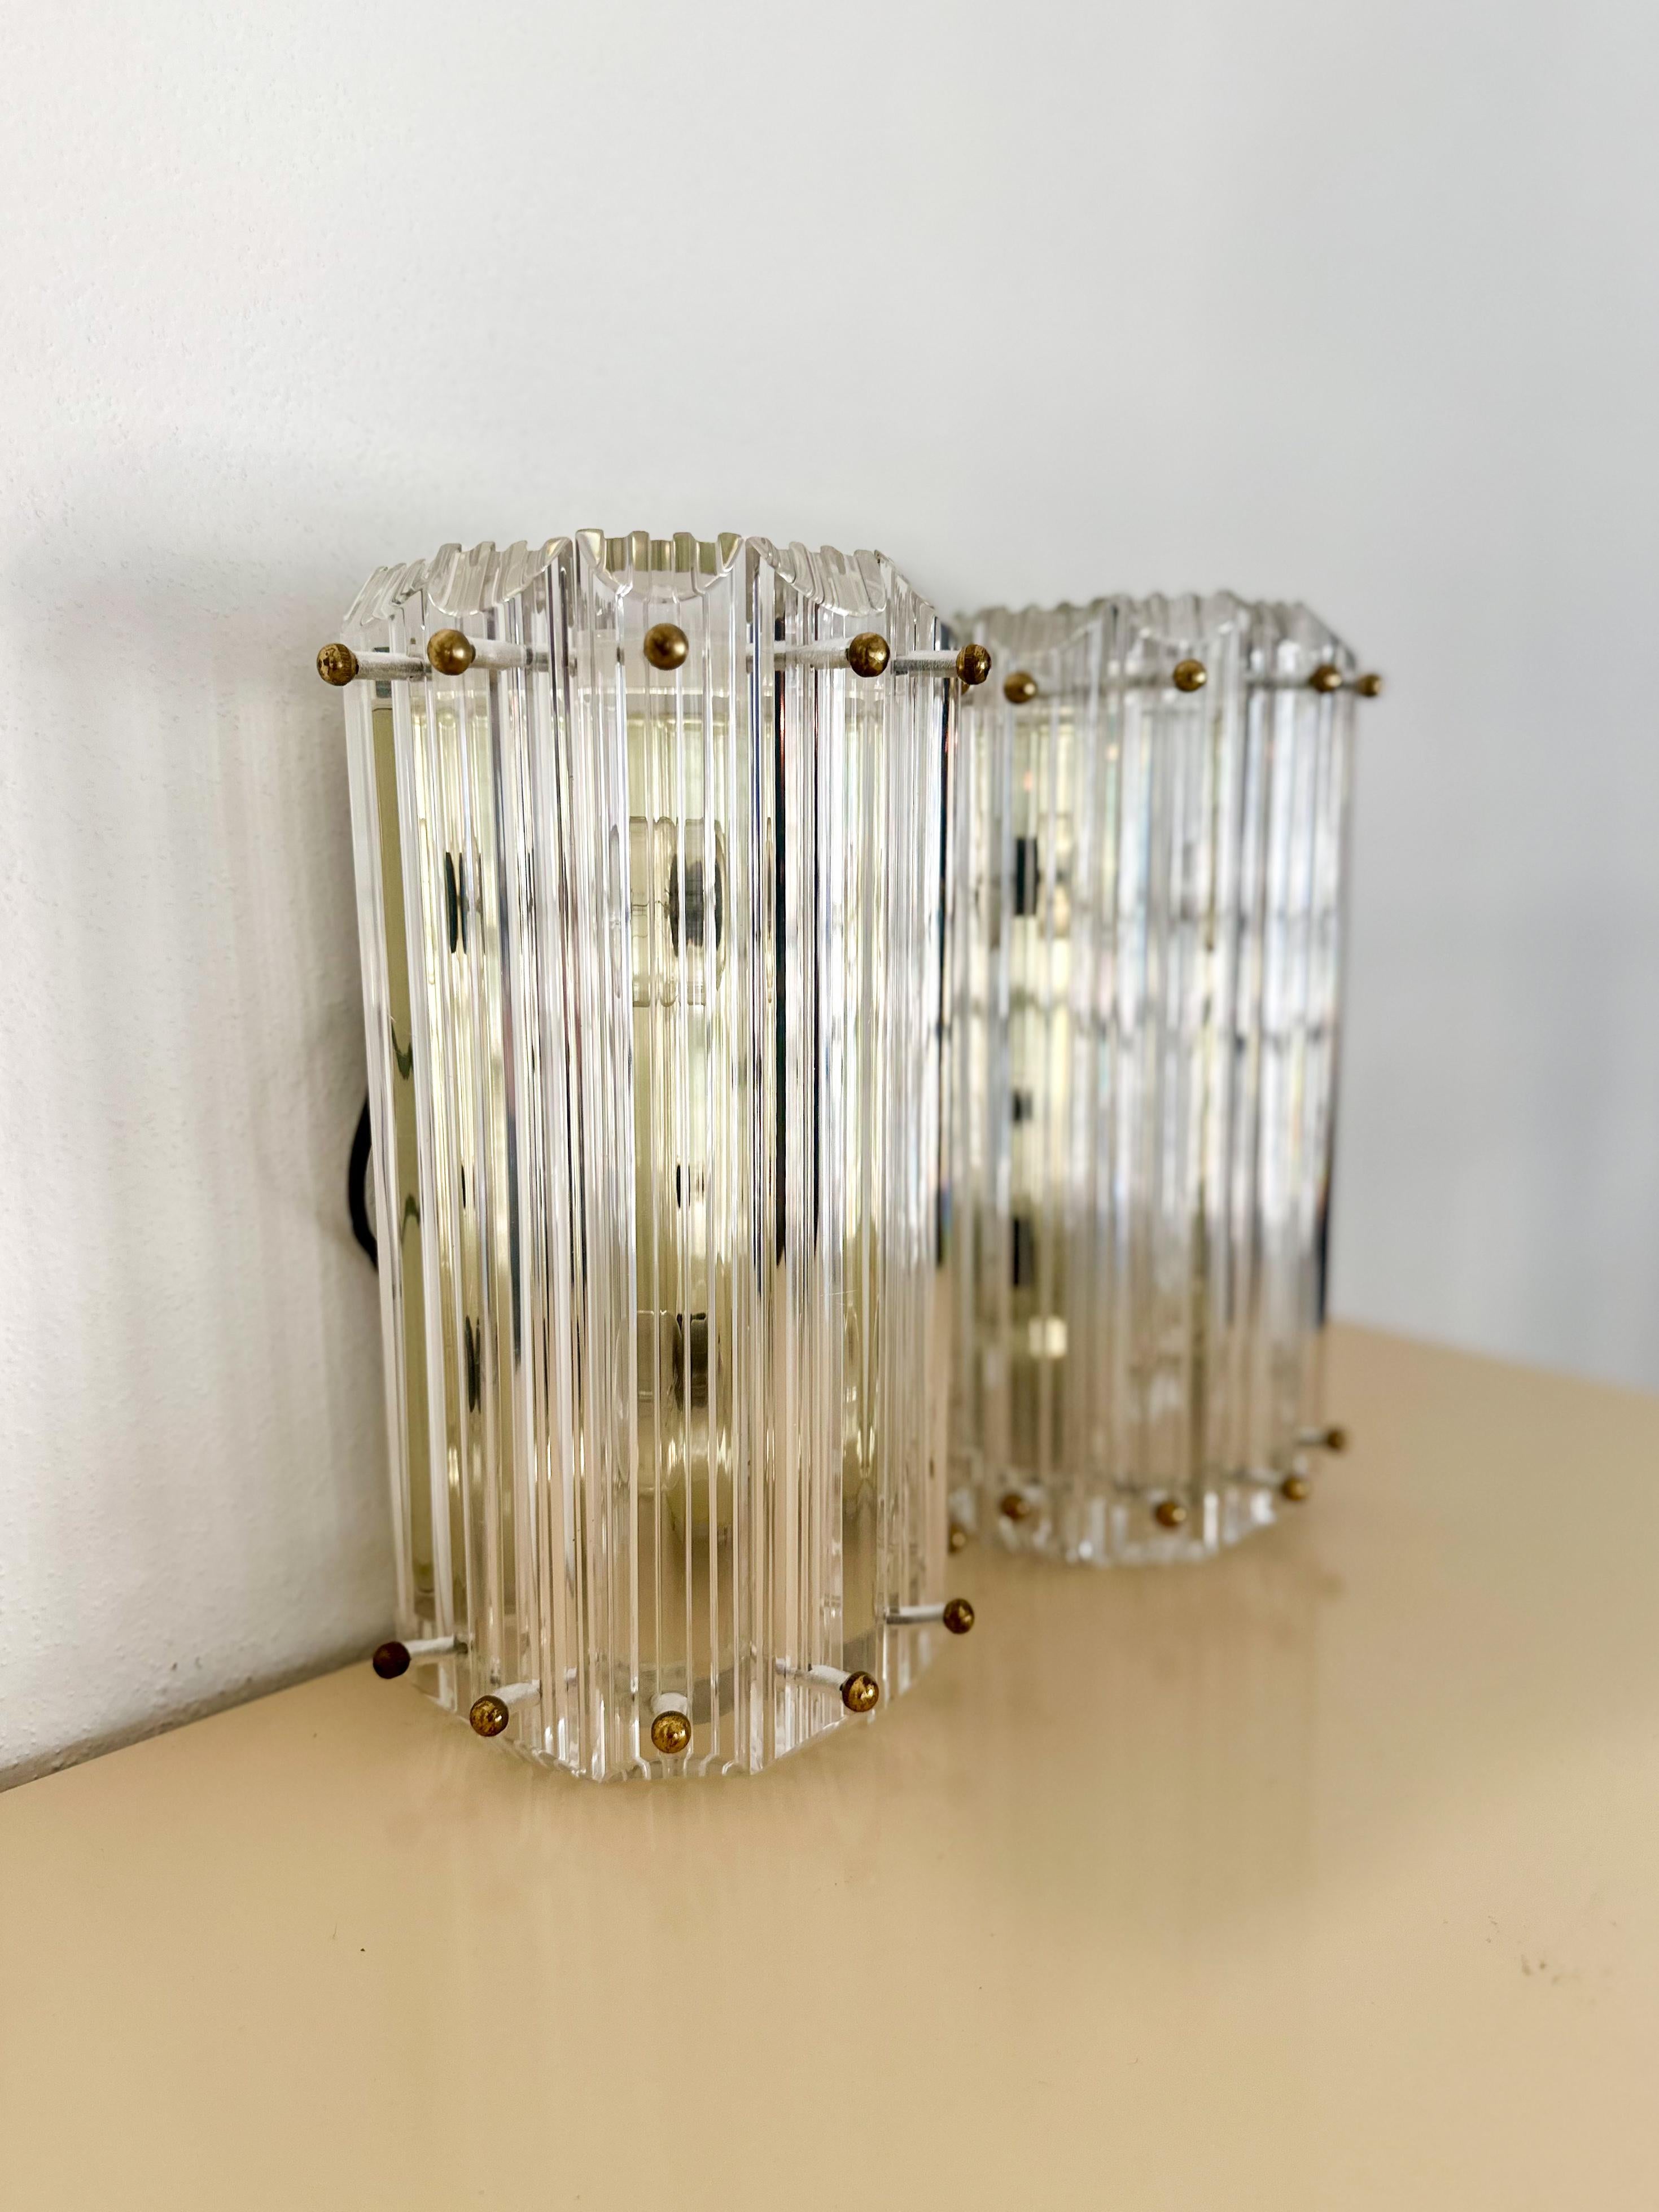 Beautiful pair of Hollywood Regency prismatic lucite wall mounted sconces with brass detail, made by Triarch Industries in Miami, c.1989. Each sconce has 7 lucite panels, held together by brass ball-cap screws, and holds two bulbs. In excellent